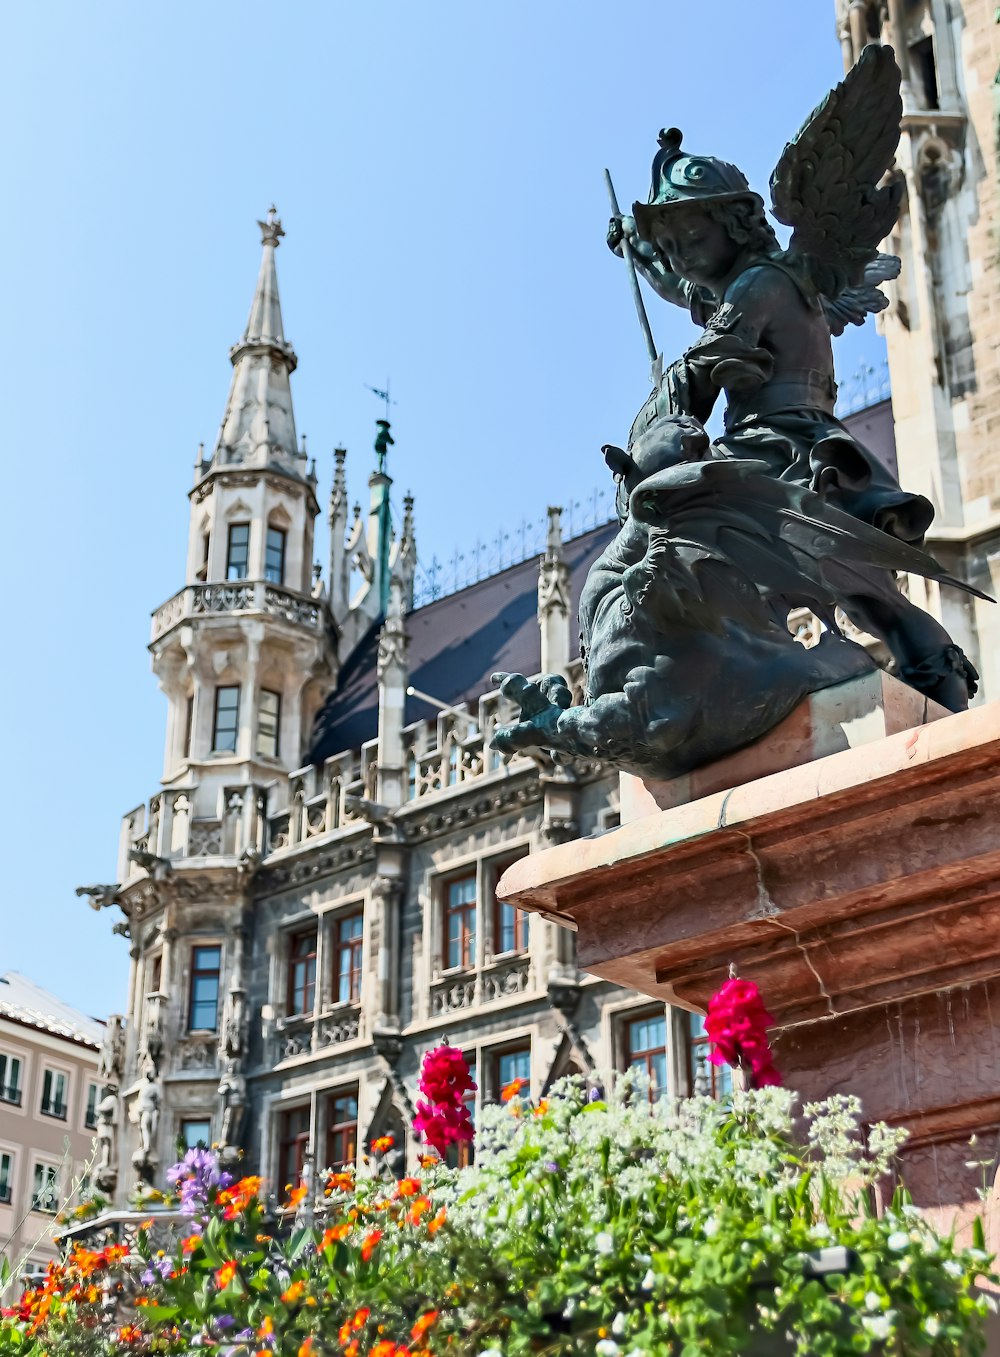 flowers in front of black statue and building